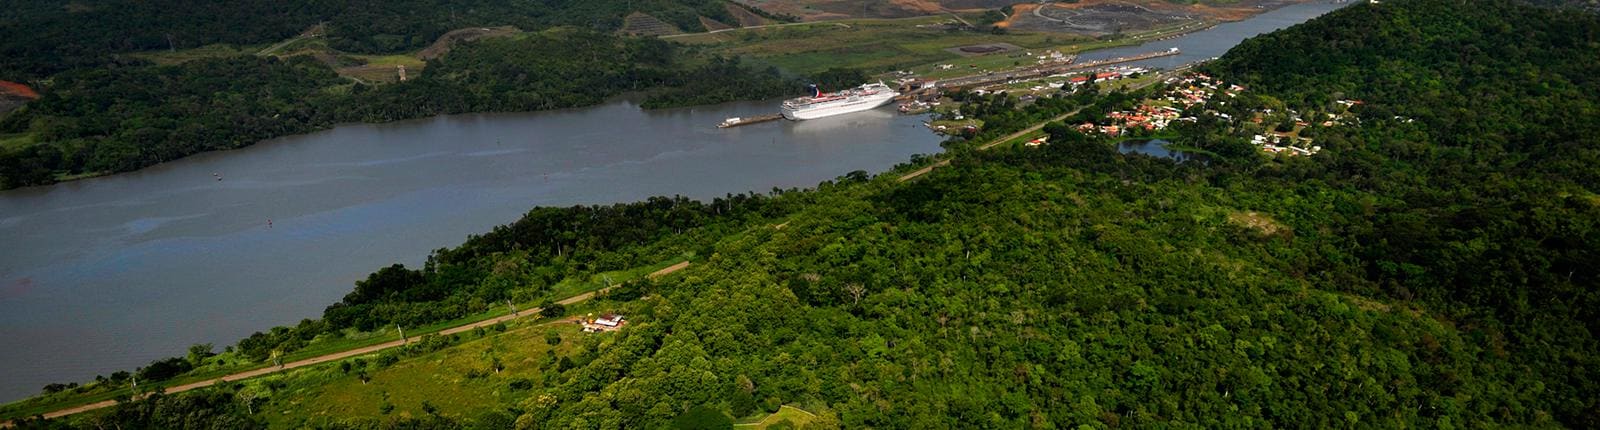 Aerial view of rich vegetation alongside the Panama Canal